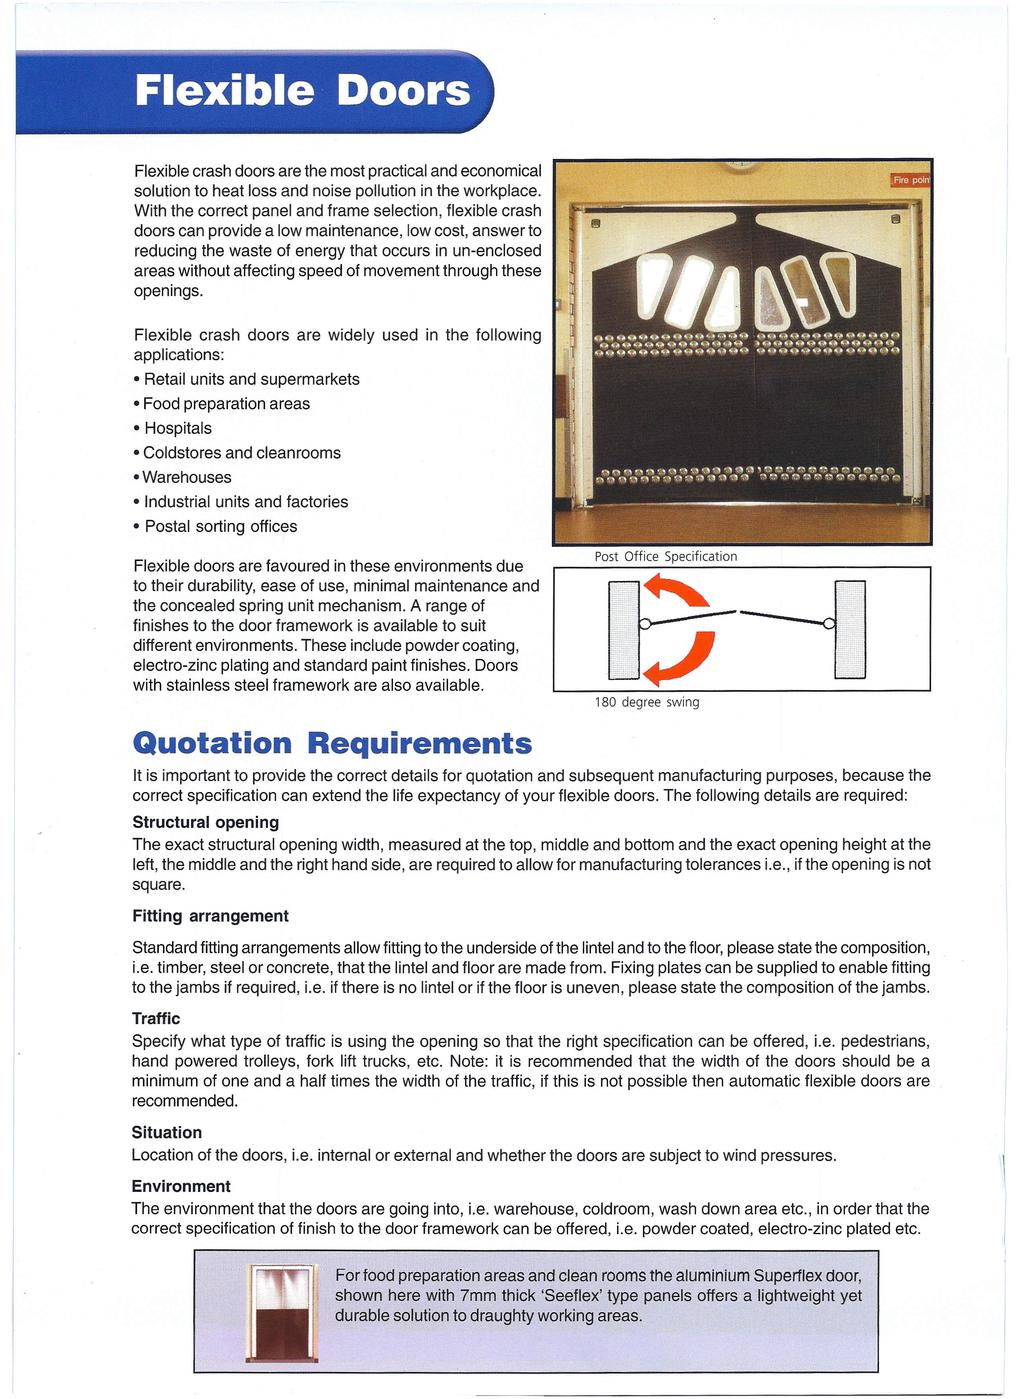 ~~~------~--~--~~--~~----~~~~~~- Flexible Doors Flexible crash doors are the most practical and economical solution to heat loss and noise pollution in the workplace.